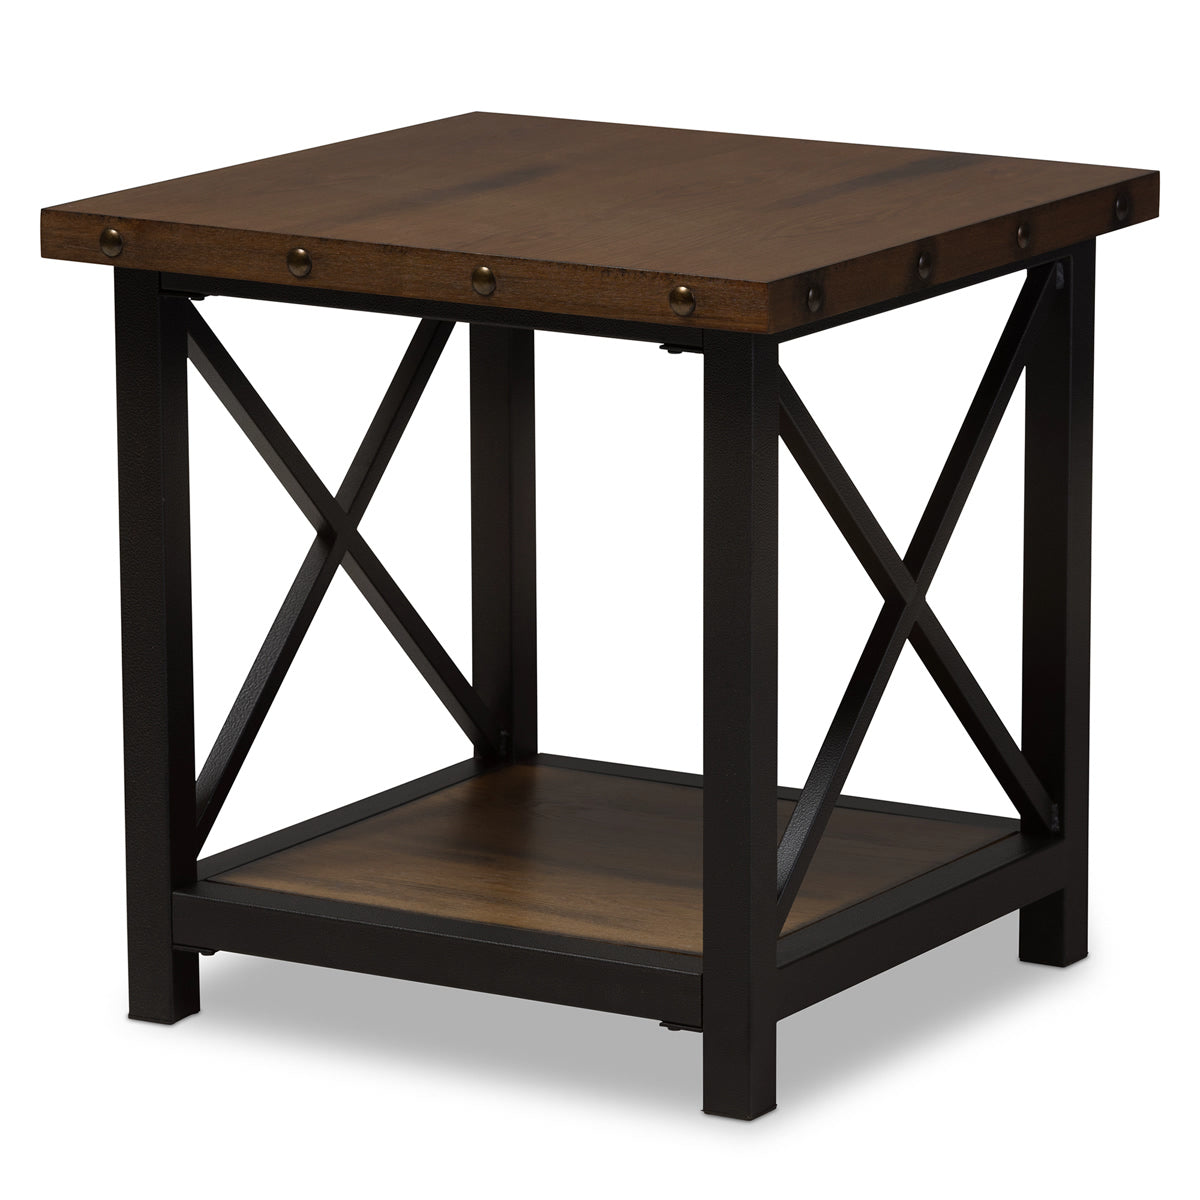 Baxton Studio Herzen Rustic Industrial Style Antique Black Textured Finished Metal Distressed Wood Occasional End Table Baxton Studio-coffee tables-Minimal And Modern - 2